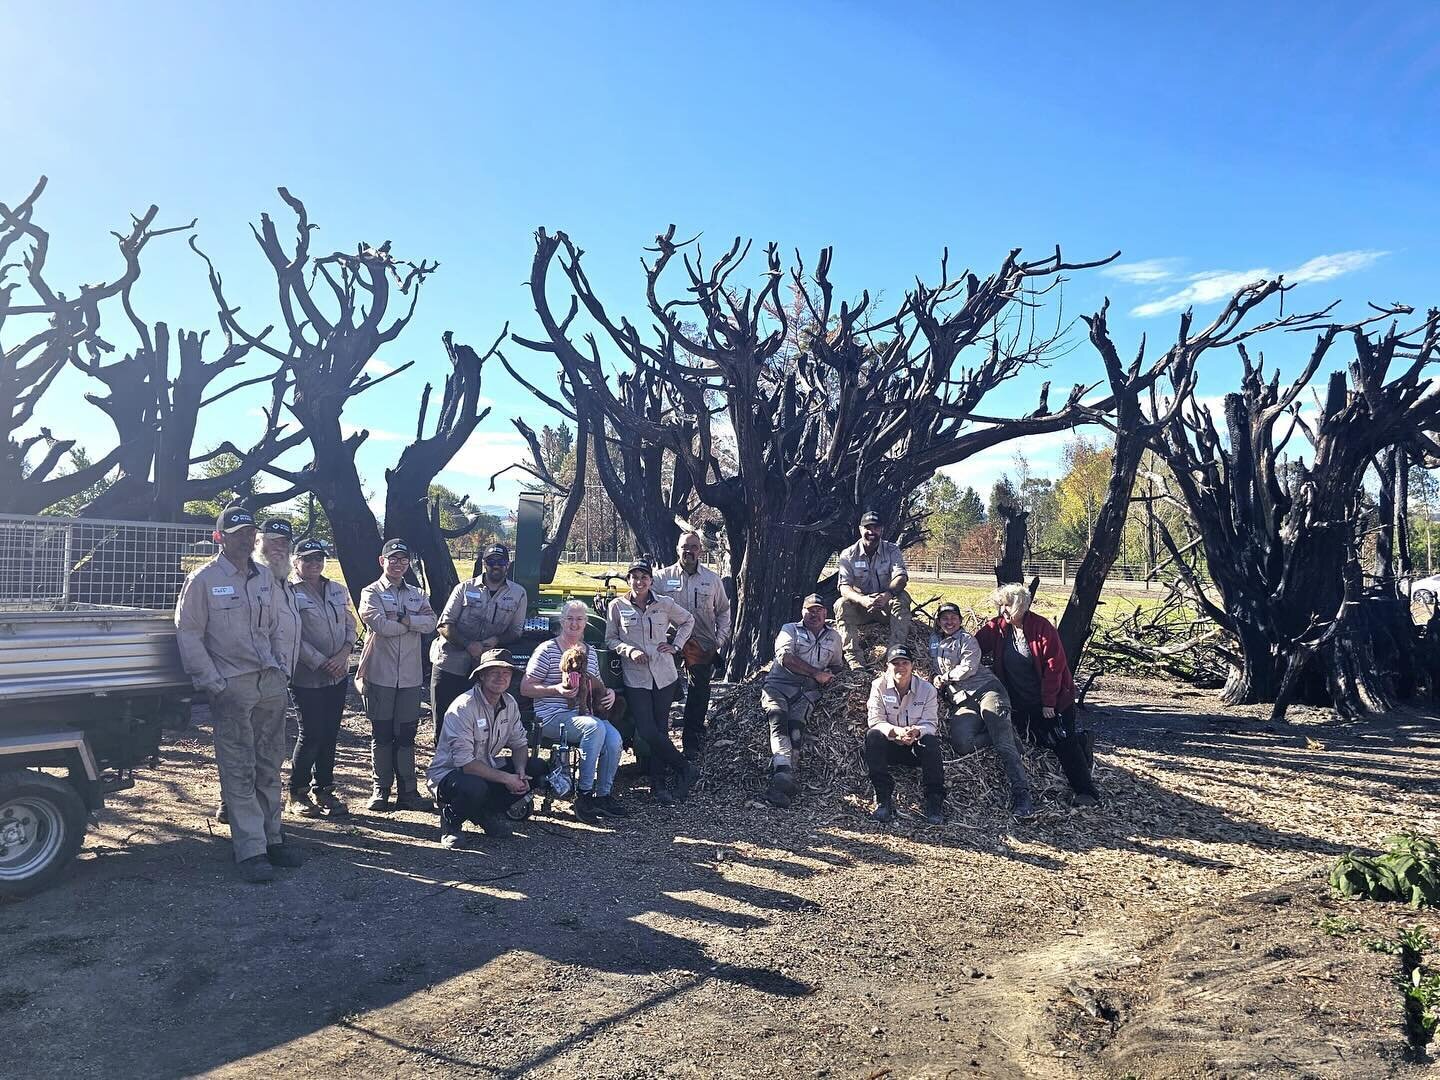 Over the weekend Taskforce Kiwi volunteers deployed on Operation St Andrews, supporting member of the Loburn community impacted by January&rsquo;s bushfire.

Over two days a team of volunteers from as far afield as Naseby in Central Otago cleared str